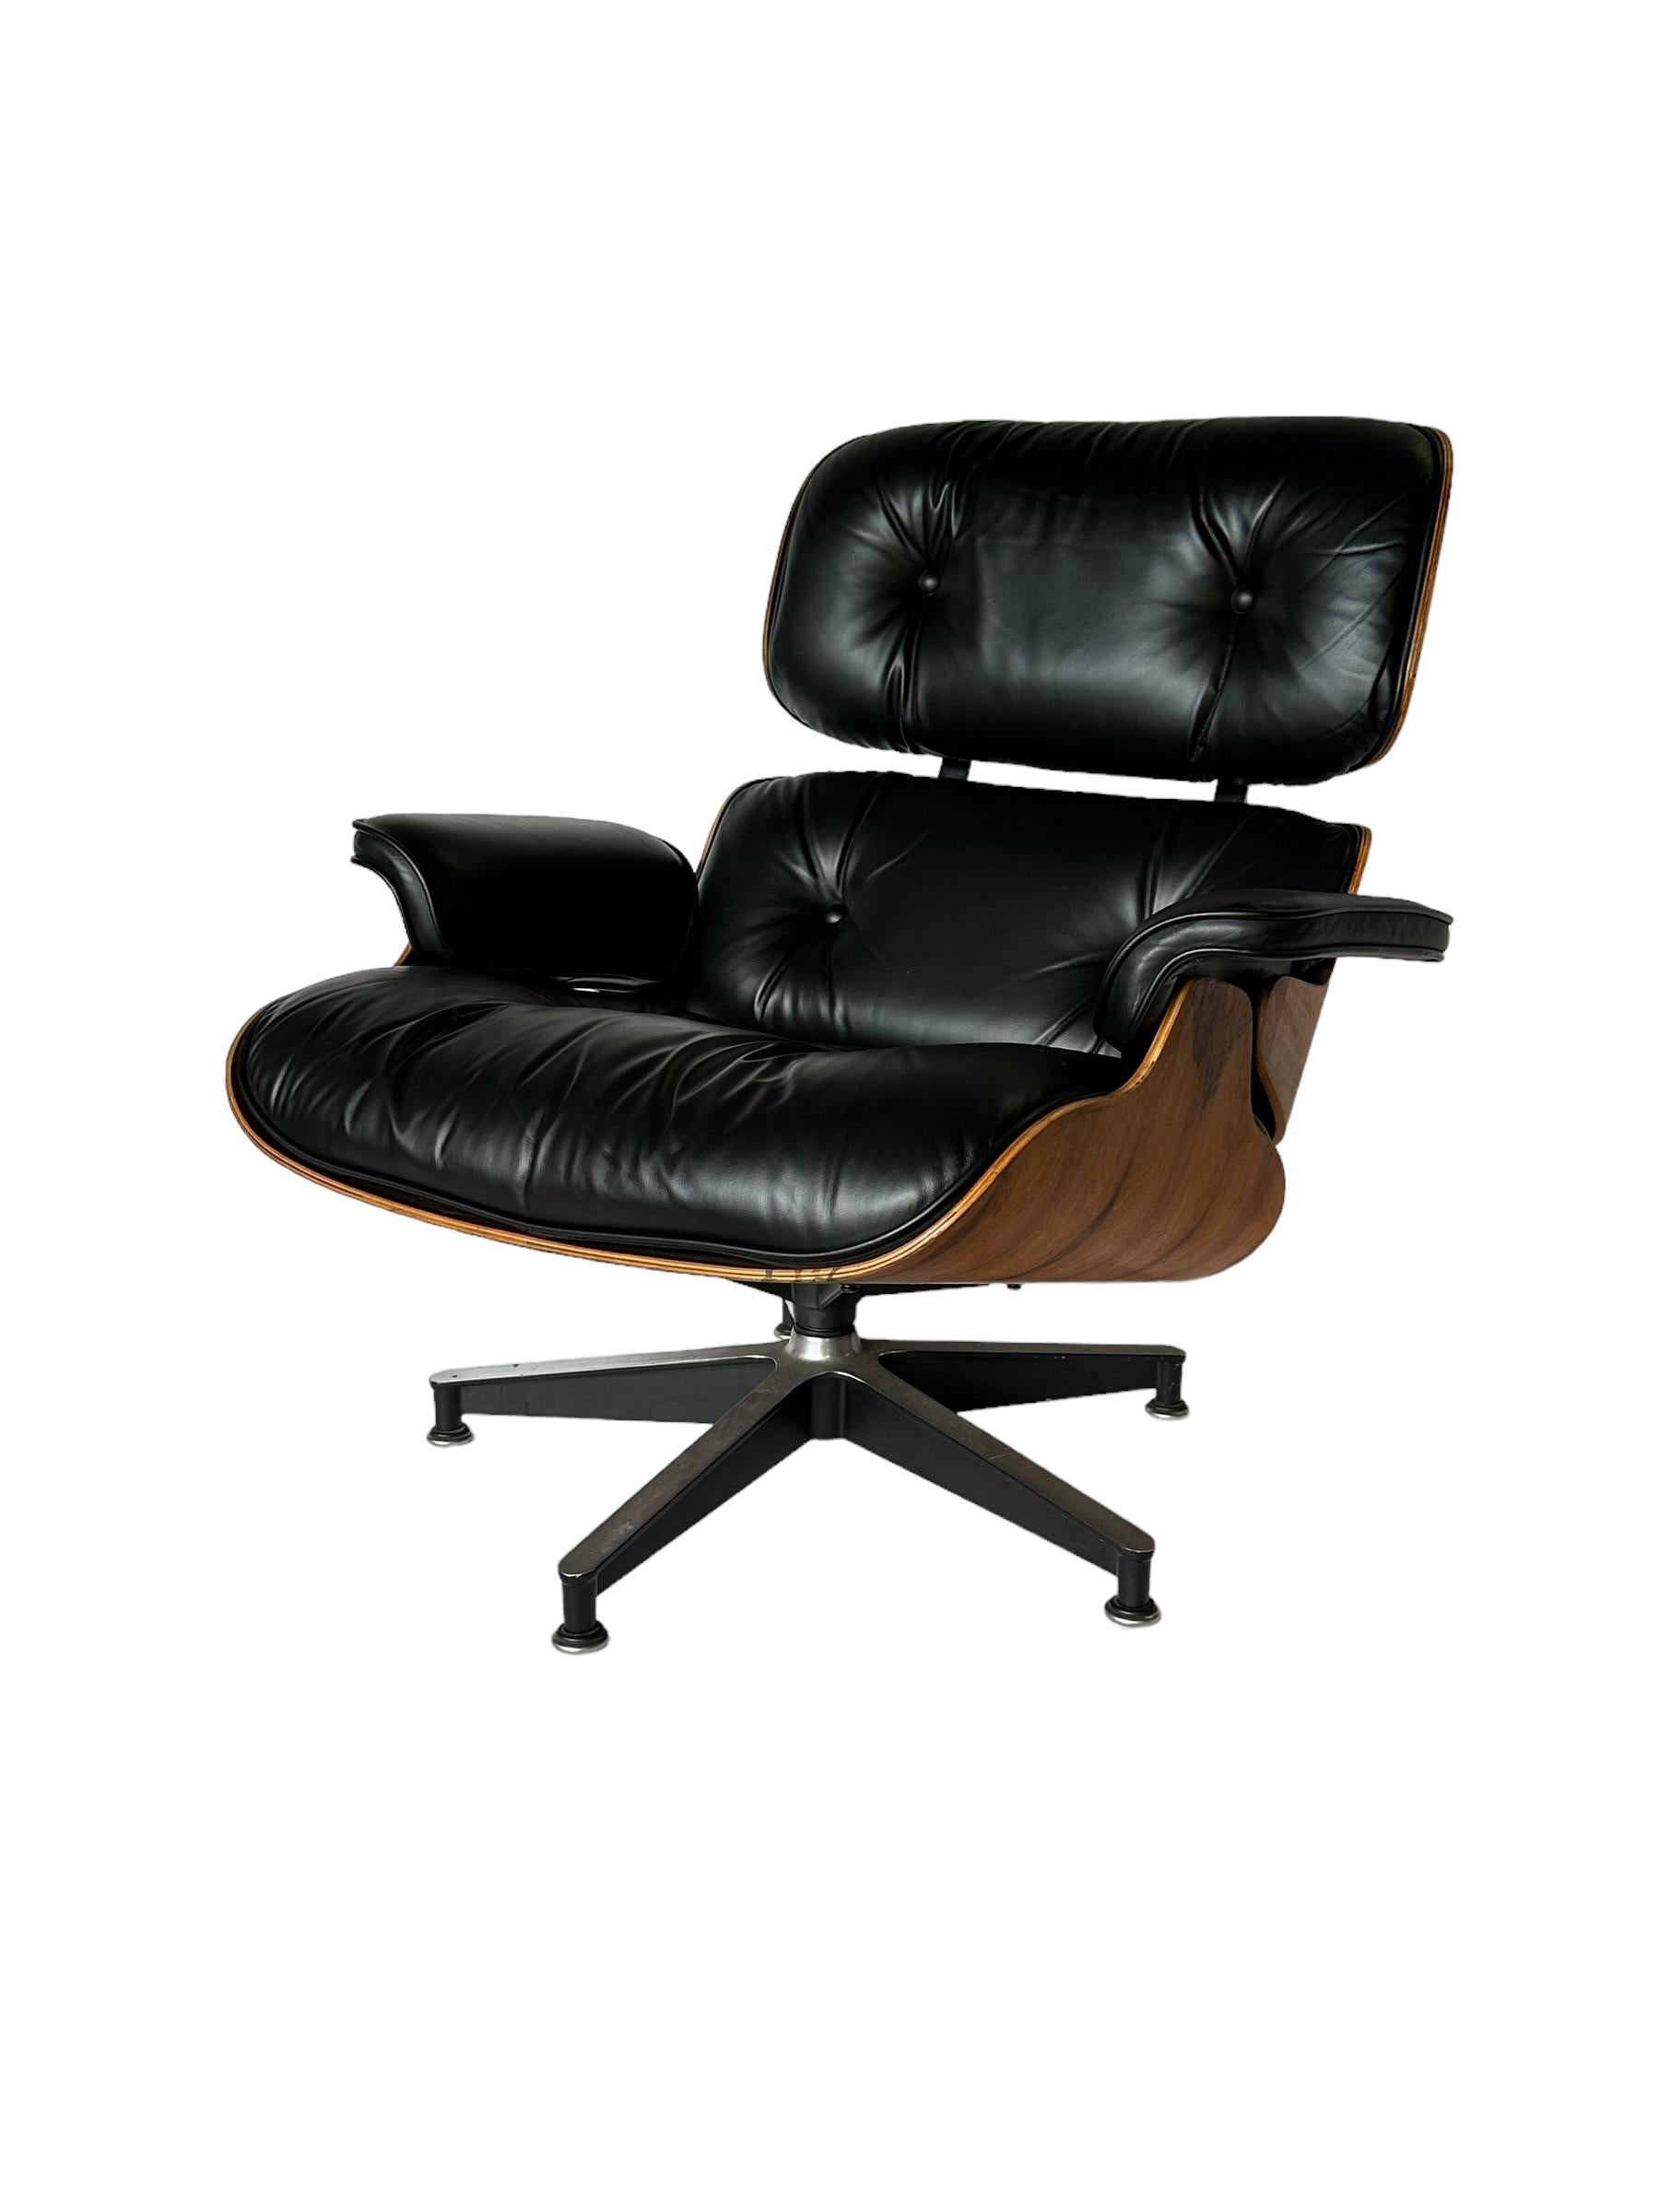 Restored Herman Miller Eames Lounge and Ottoman 5